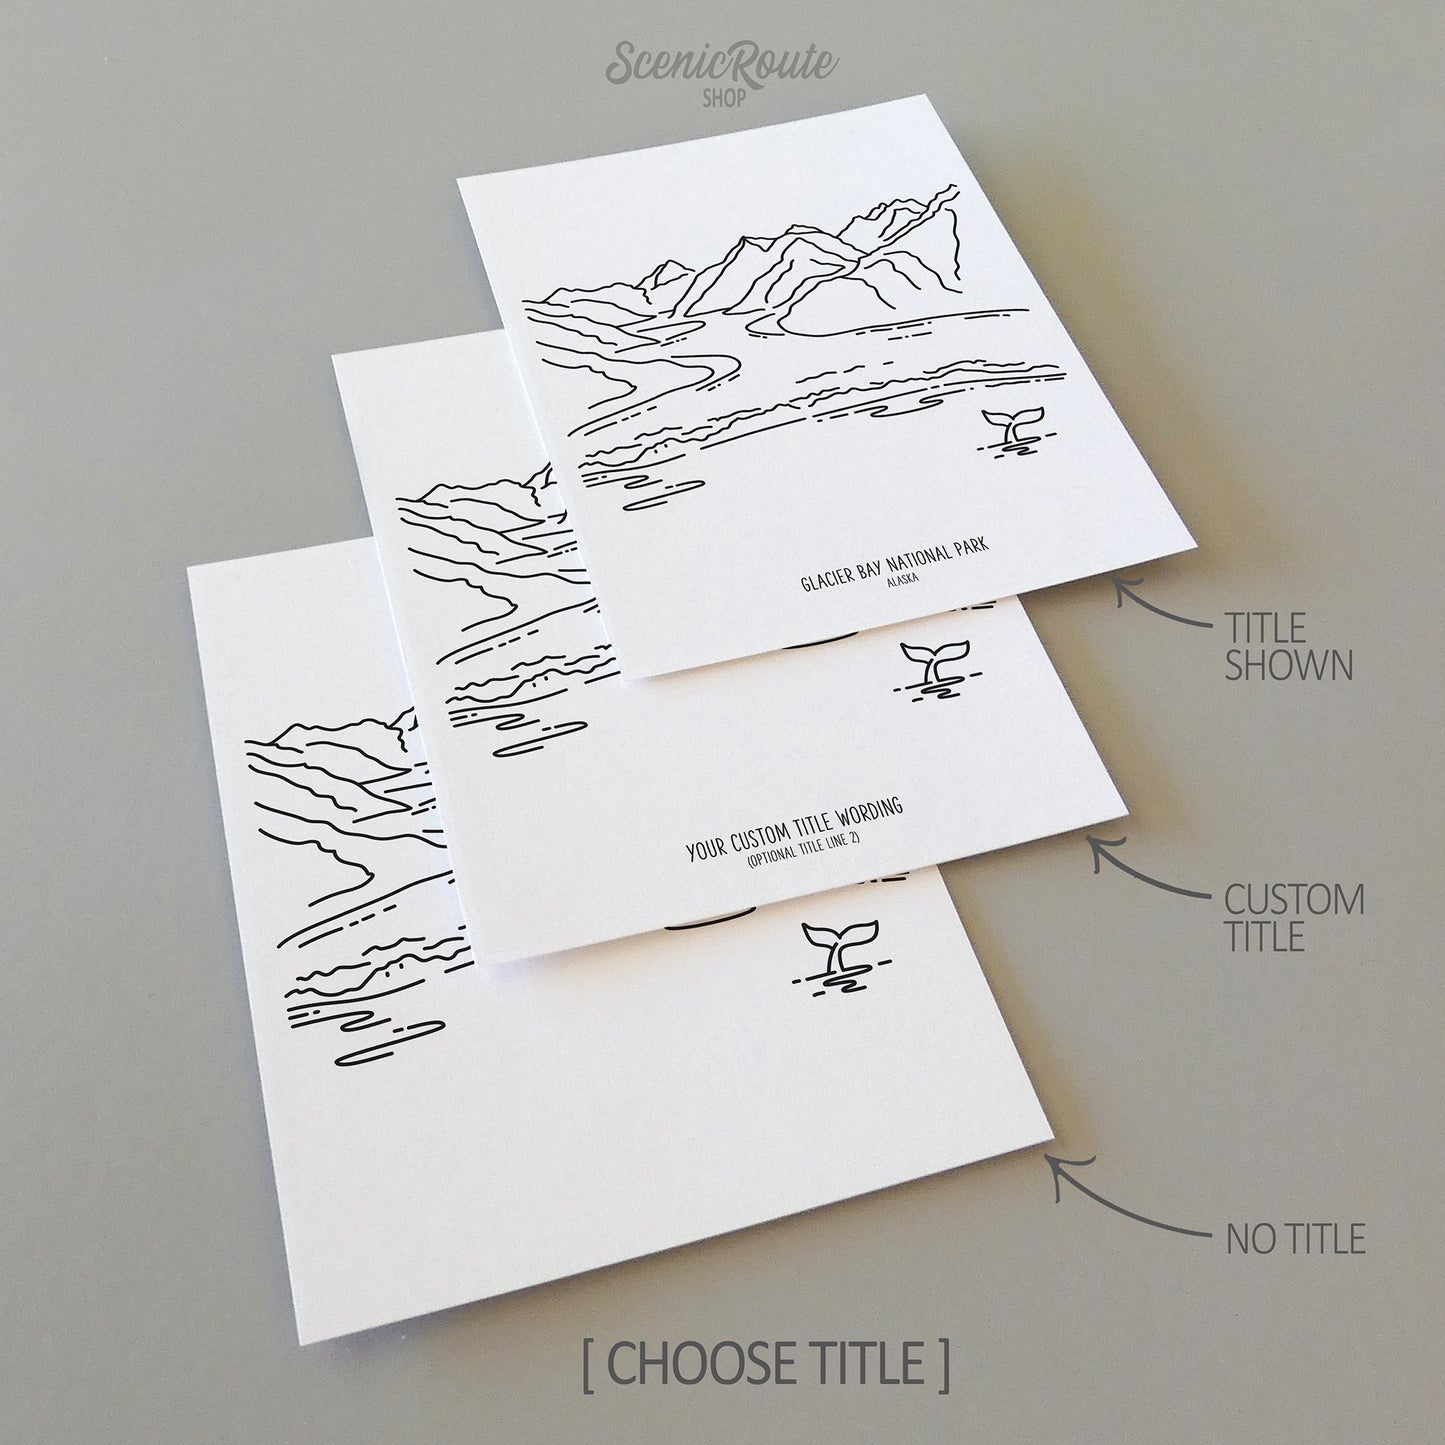 Three line art drawings of Glacier Bay National Park on white linen paper with a gray background. The pieces are shown with title options that can be chosen and personalized.